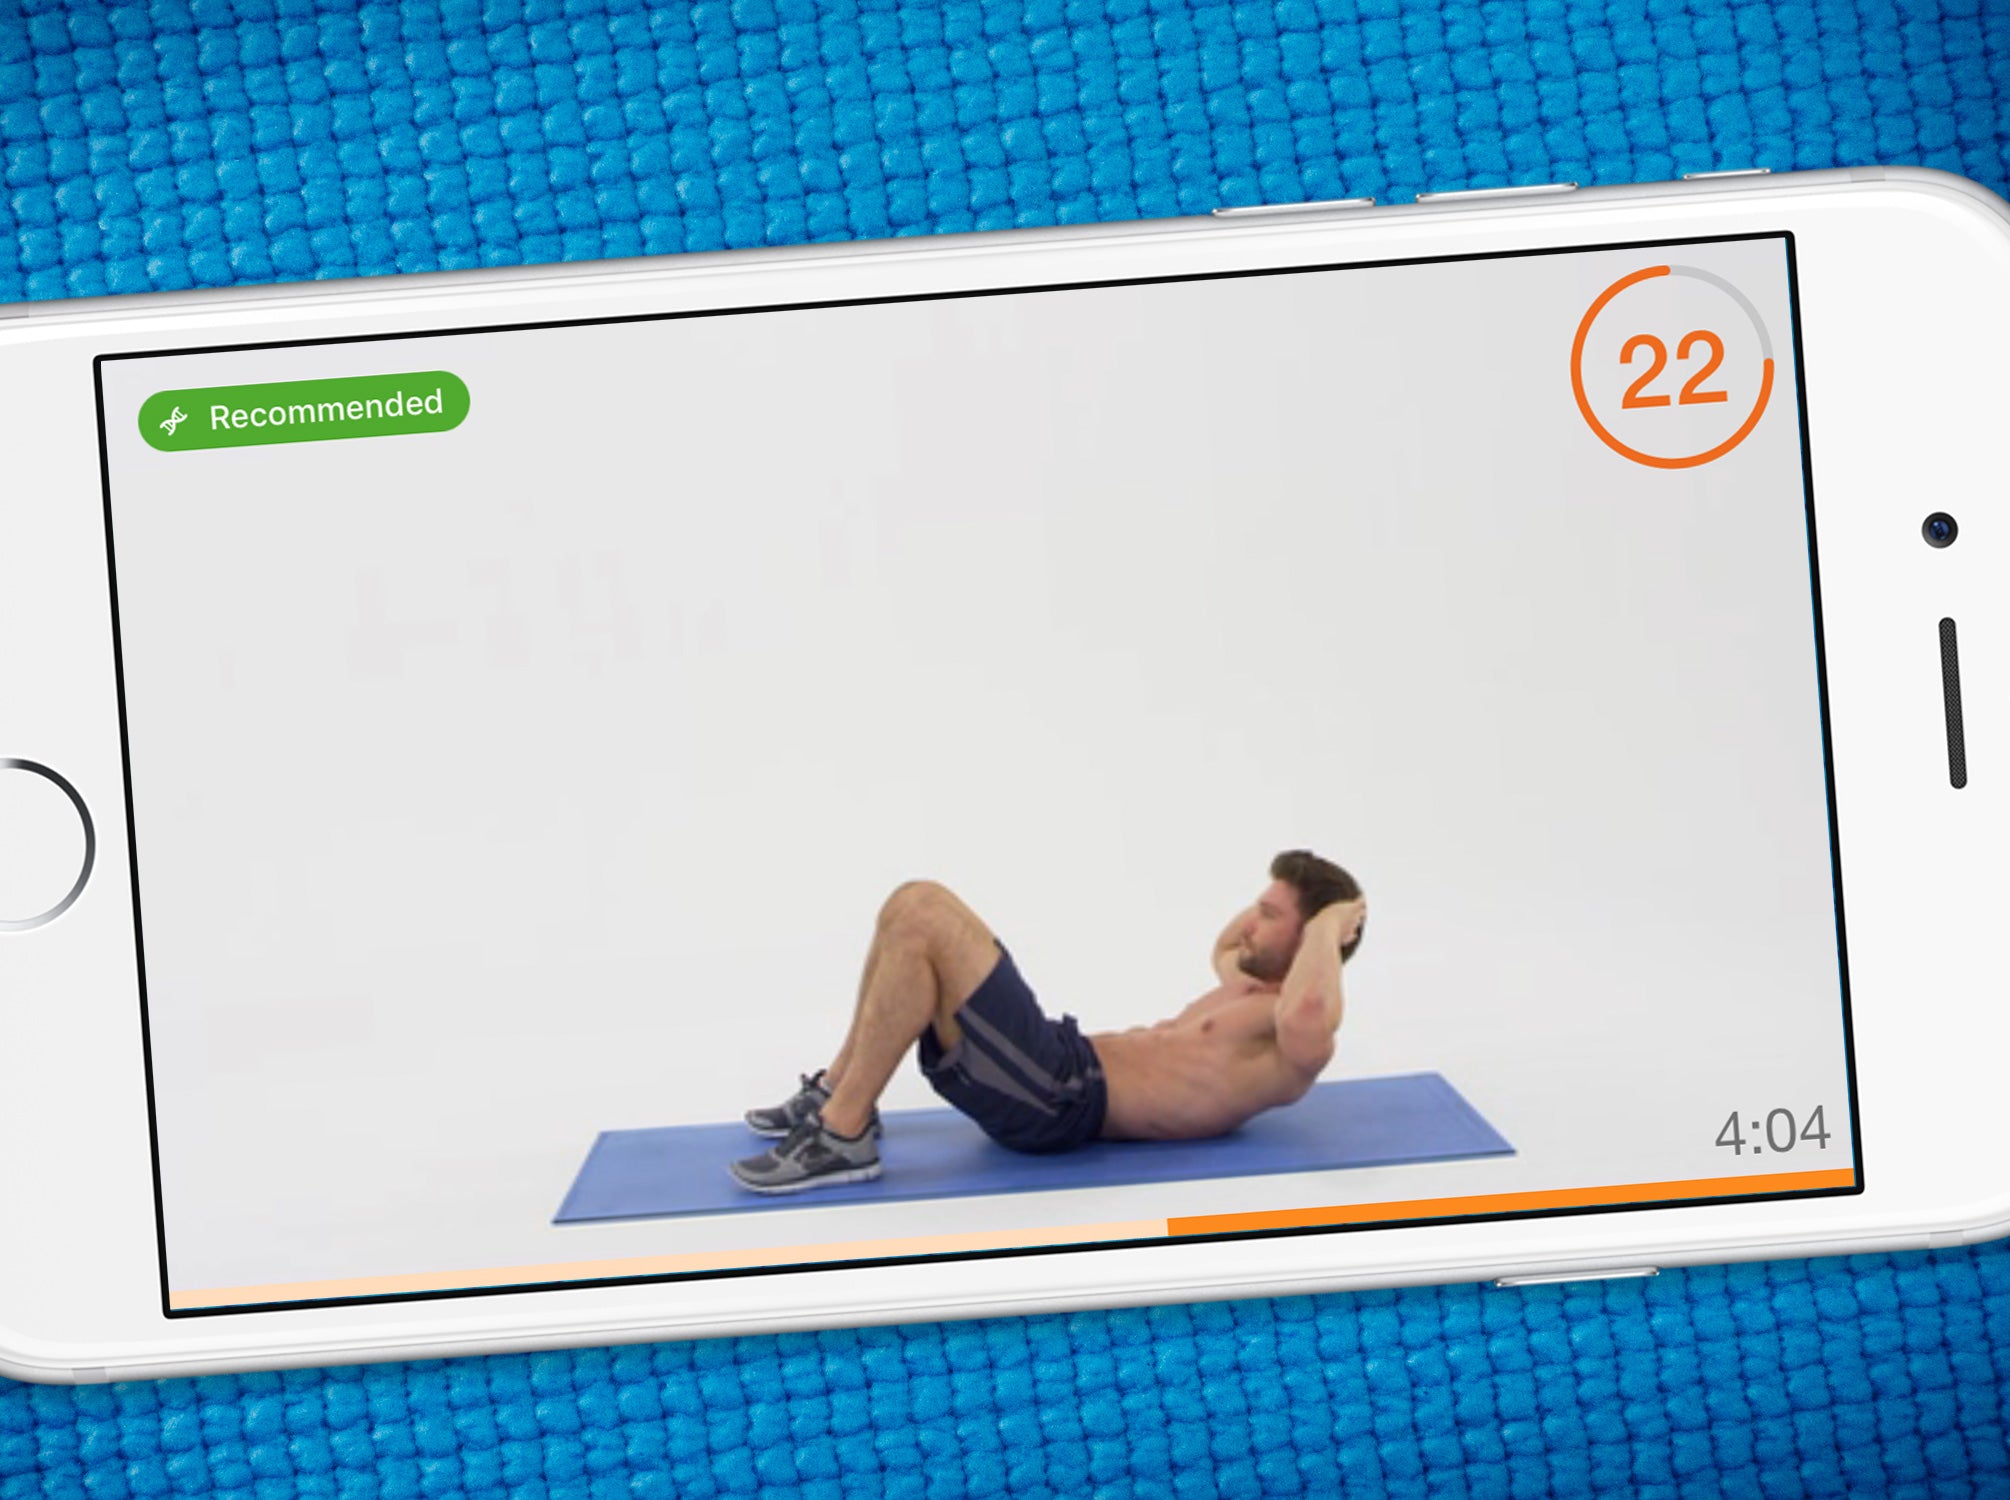 Work out to easy-to-follow home workout videos where the workouts will be generated custom to each individual and optimized for weight loss and safety.